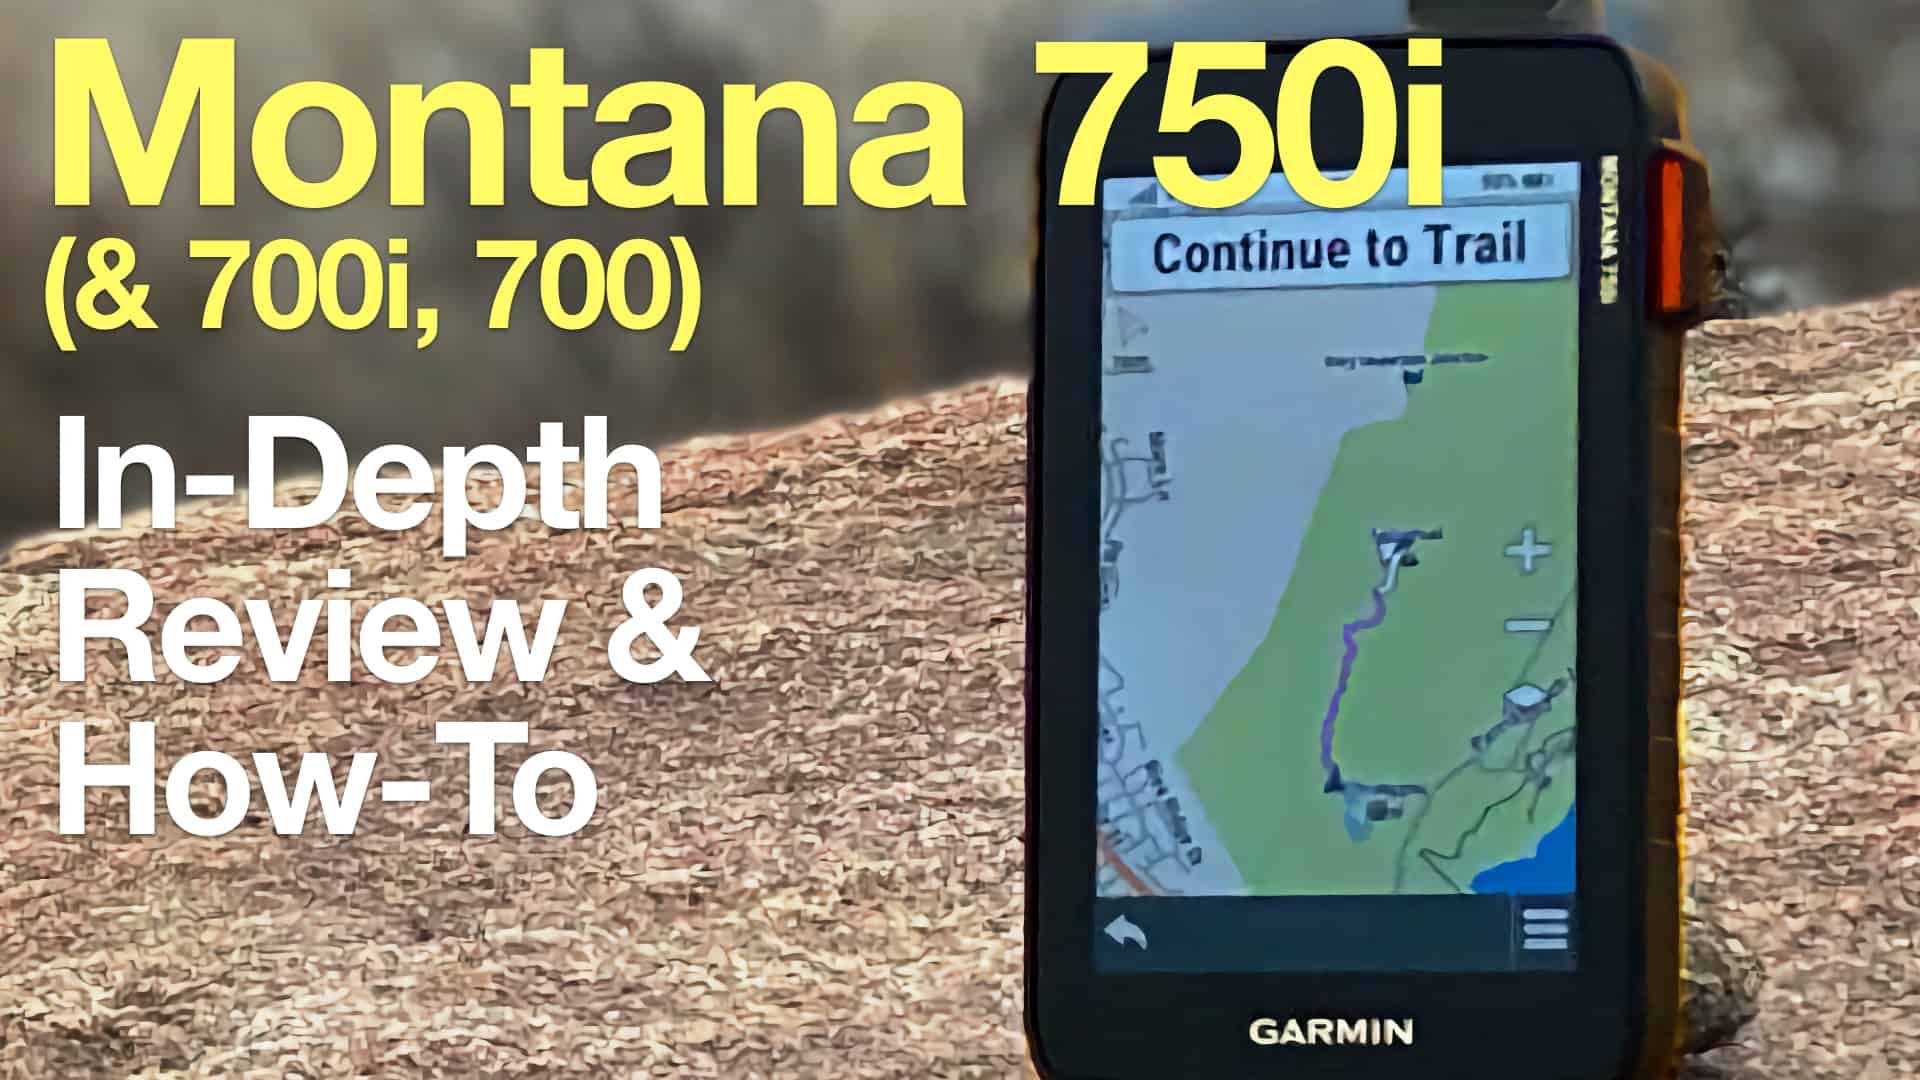 Video 1 - Overview to the Garmin eTrex SE 